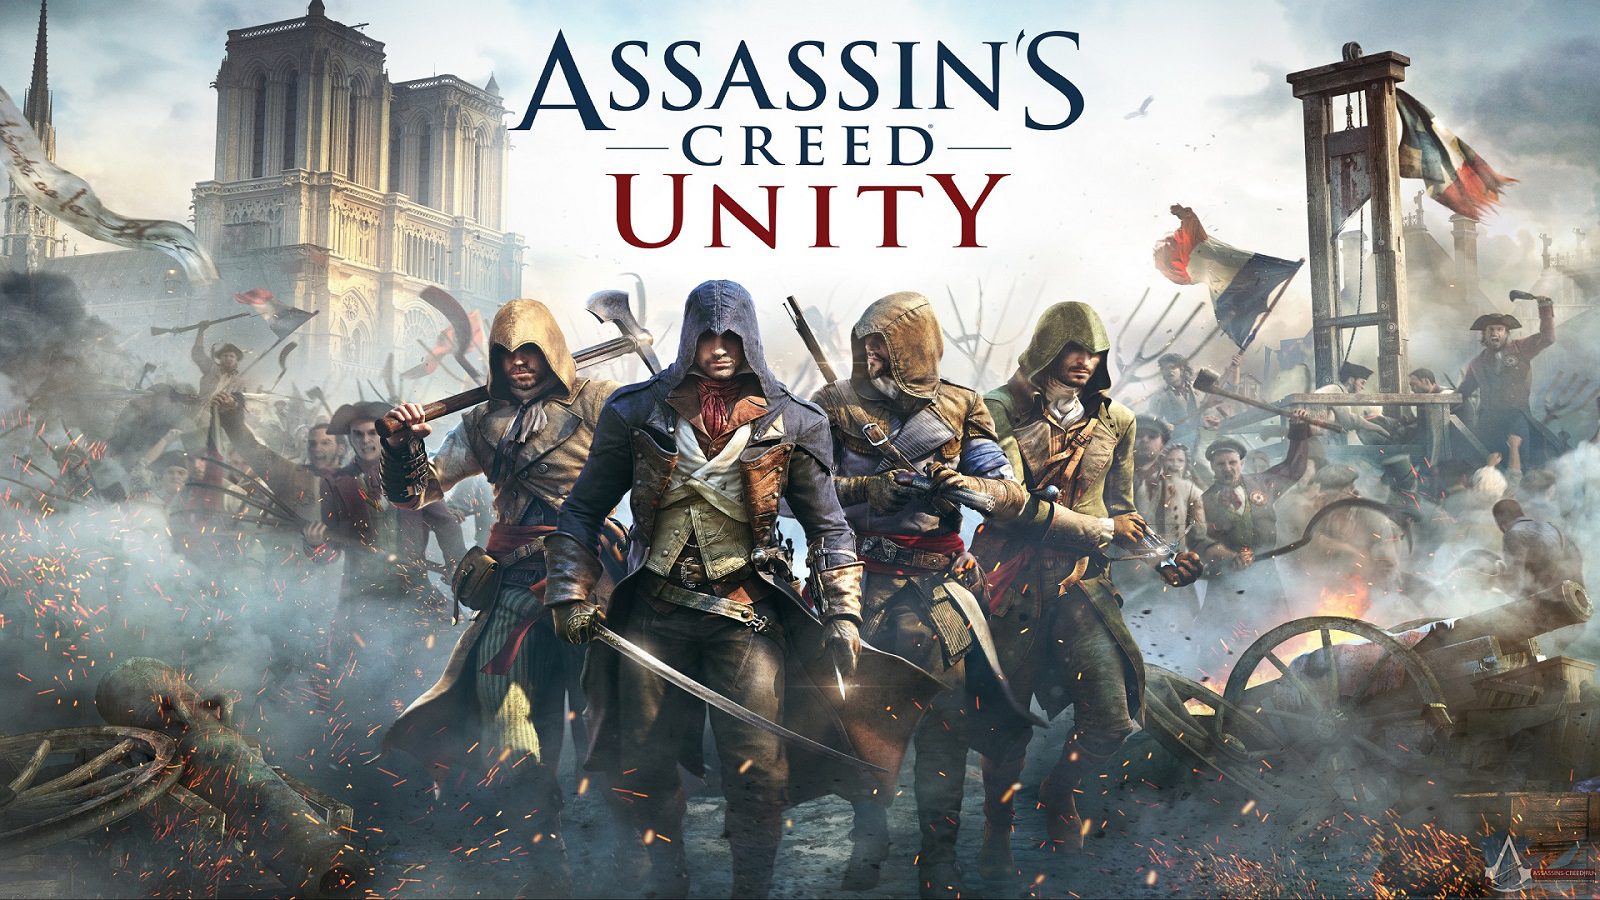 free download xbox one assassin